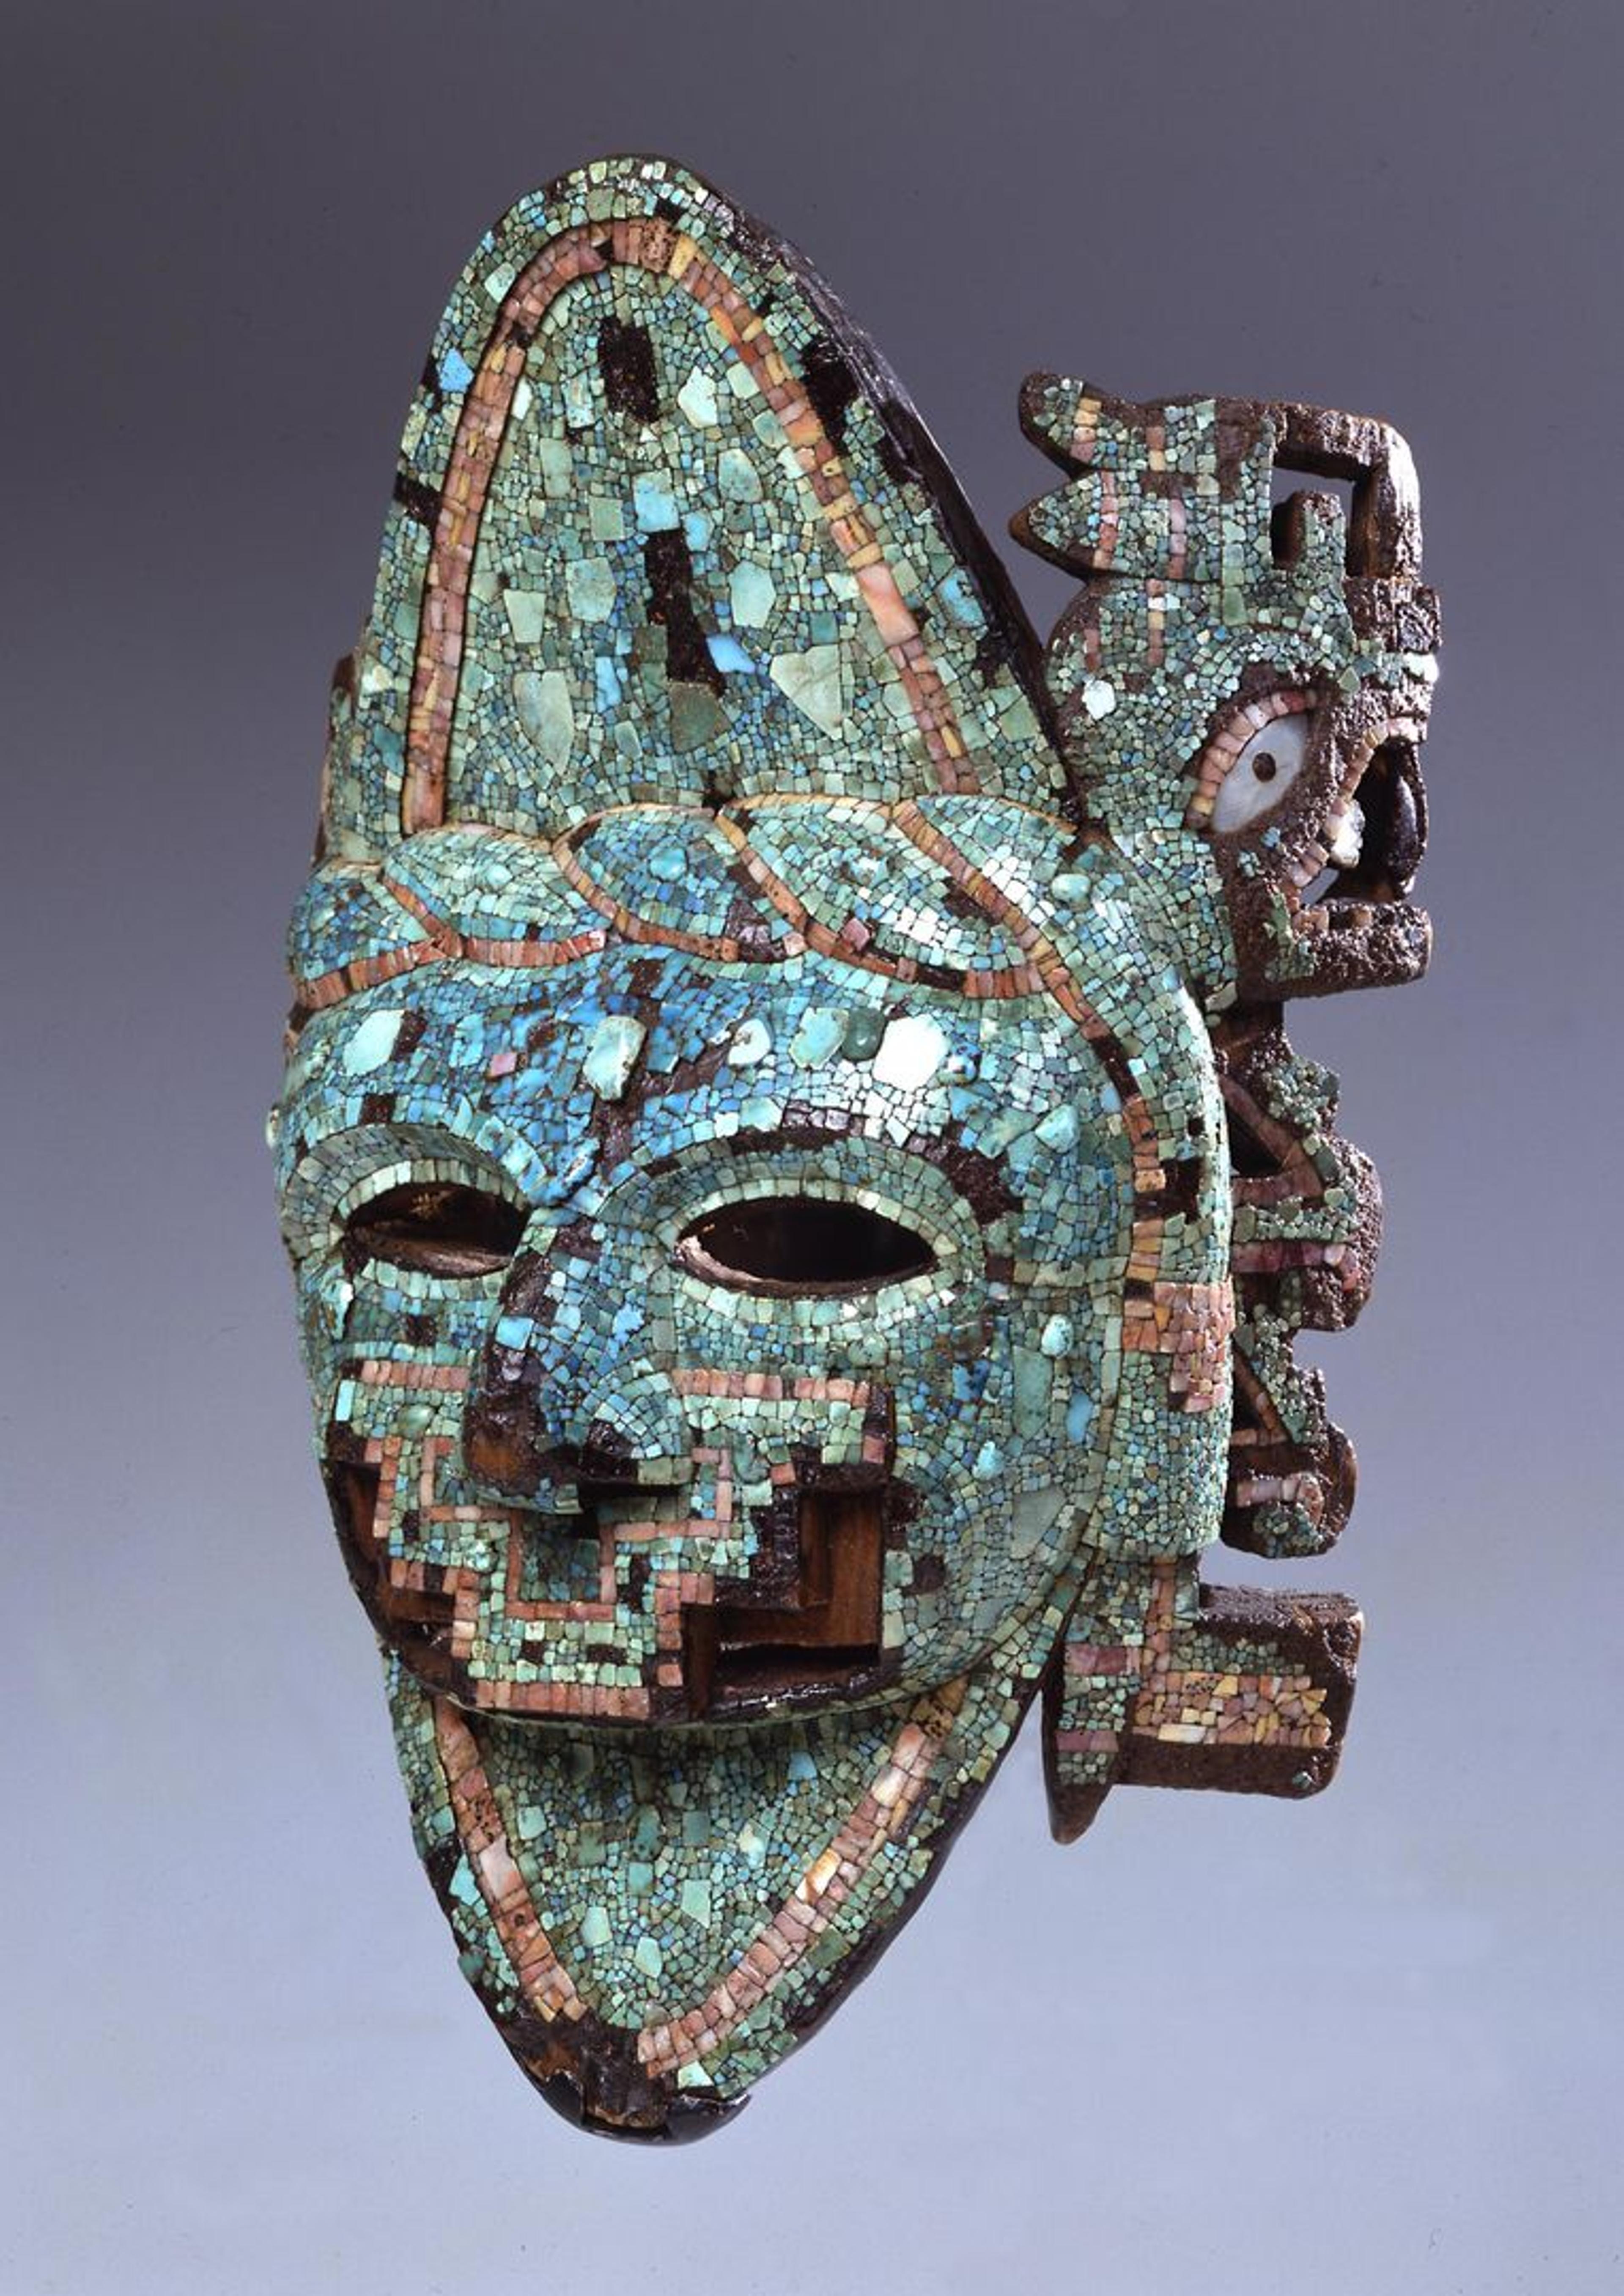 A mask from the ancient Americas made of turquoise, wood, mother-of-pearl, shell 